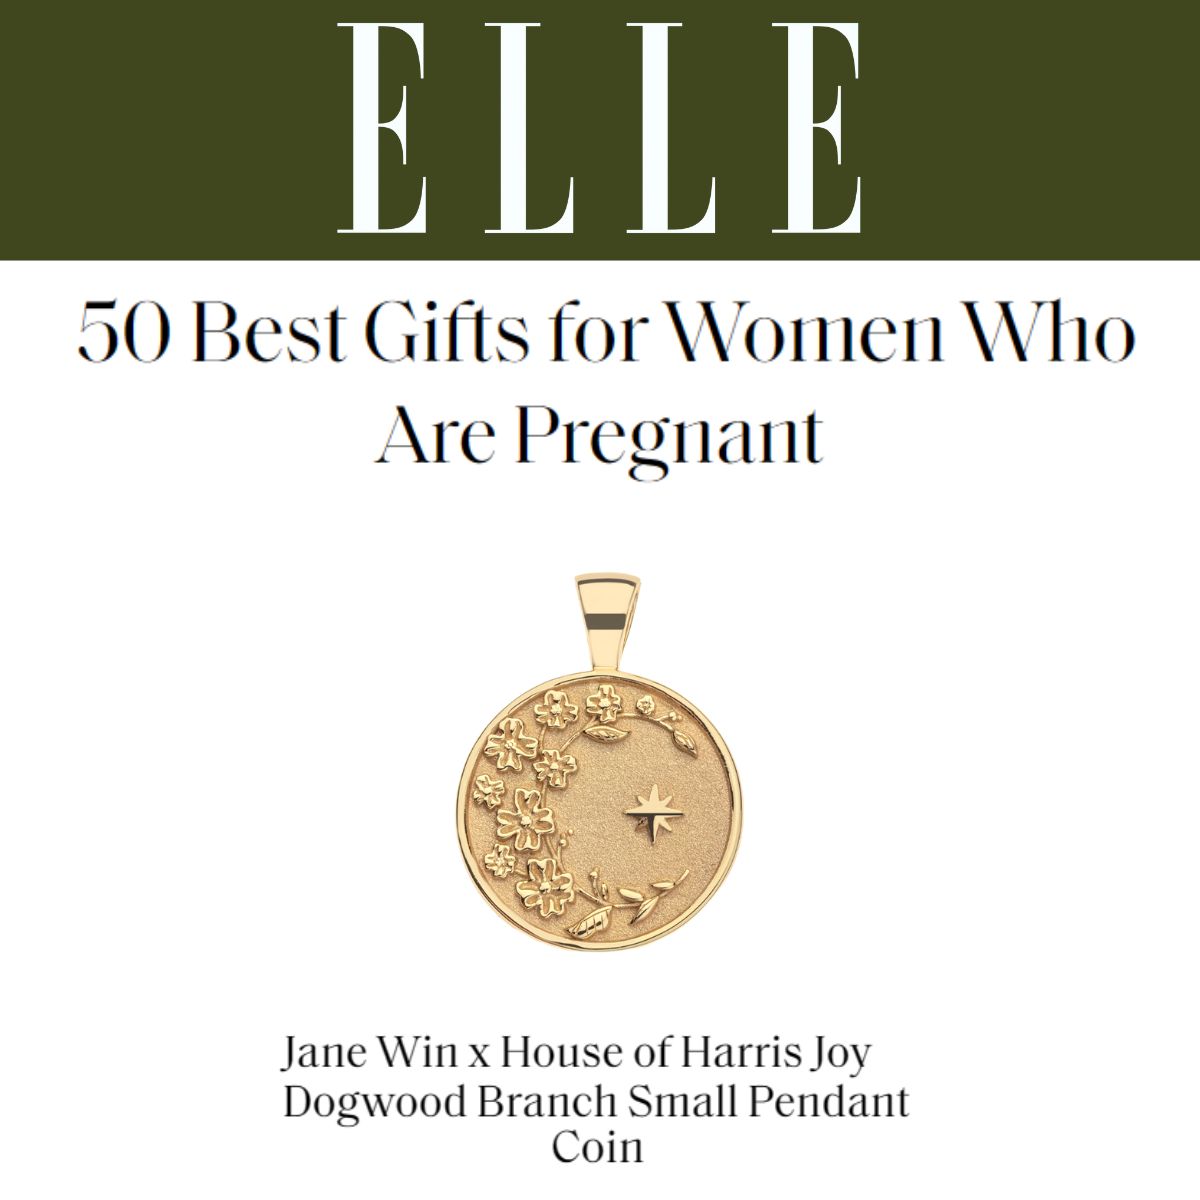 Press Highlight: Elle's "50 Best Gifts for Women Who are Pregnant"